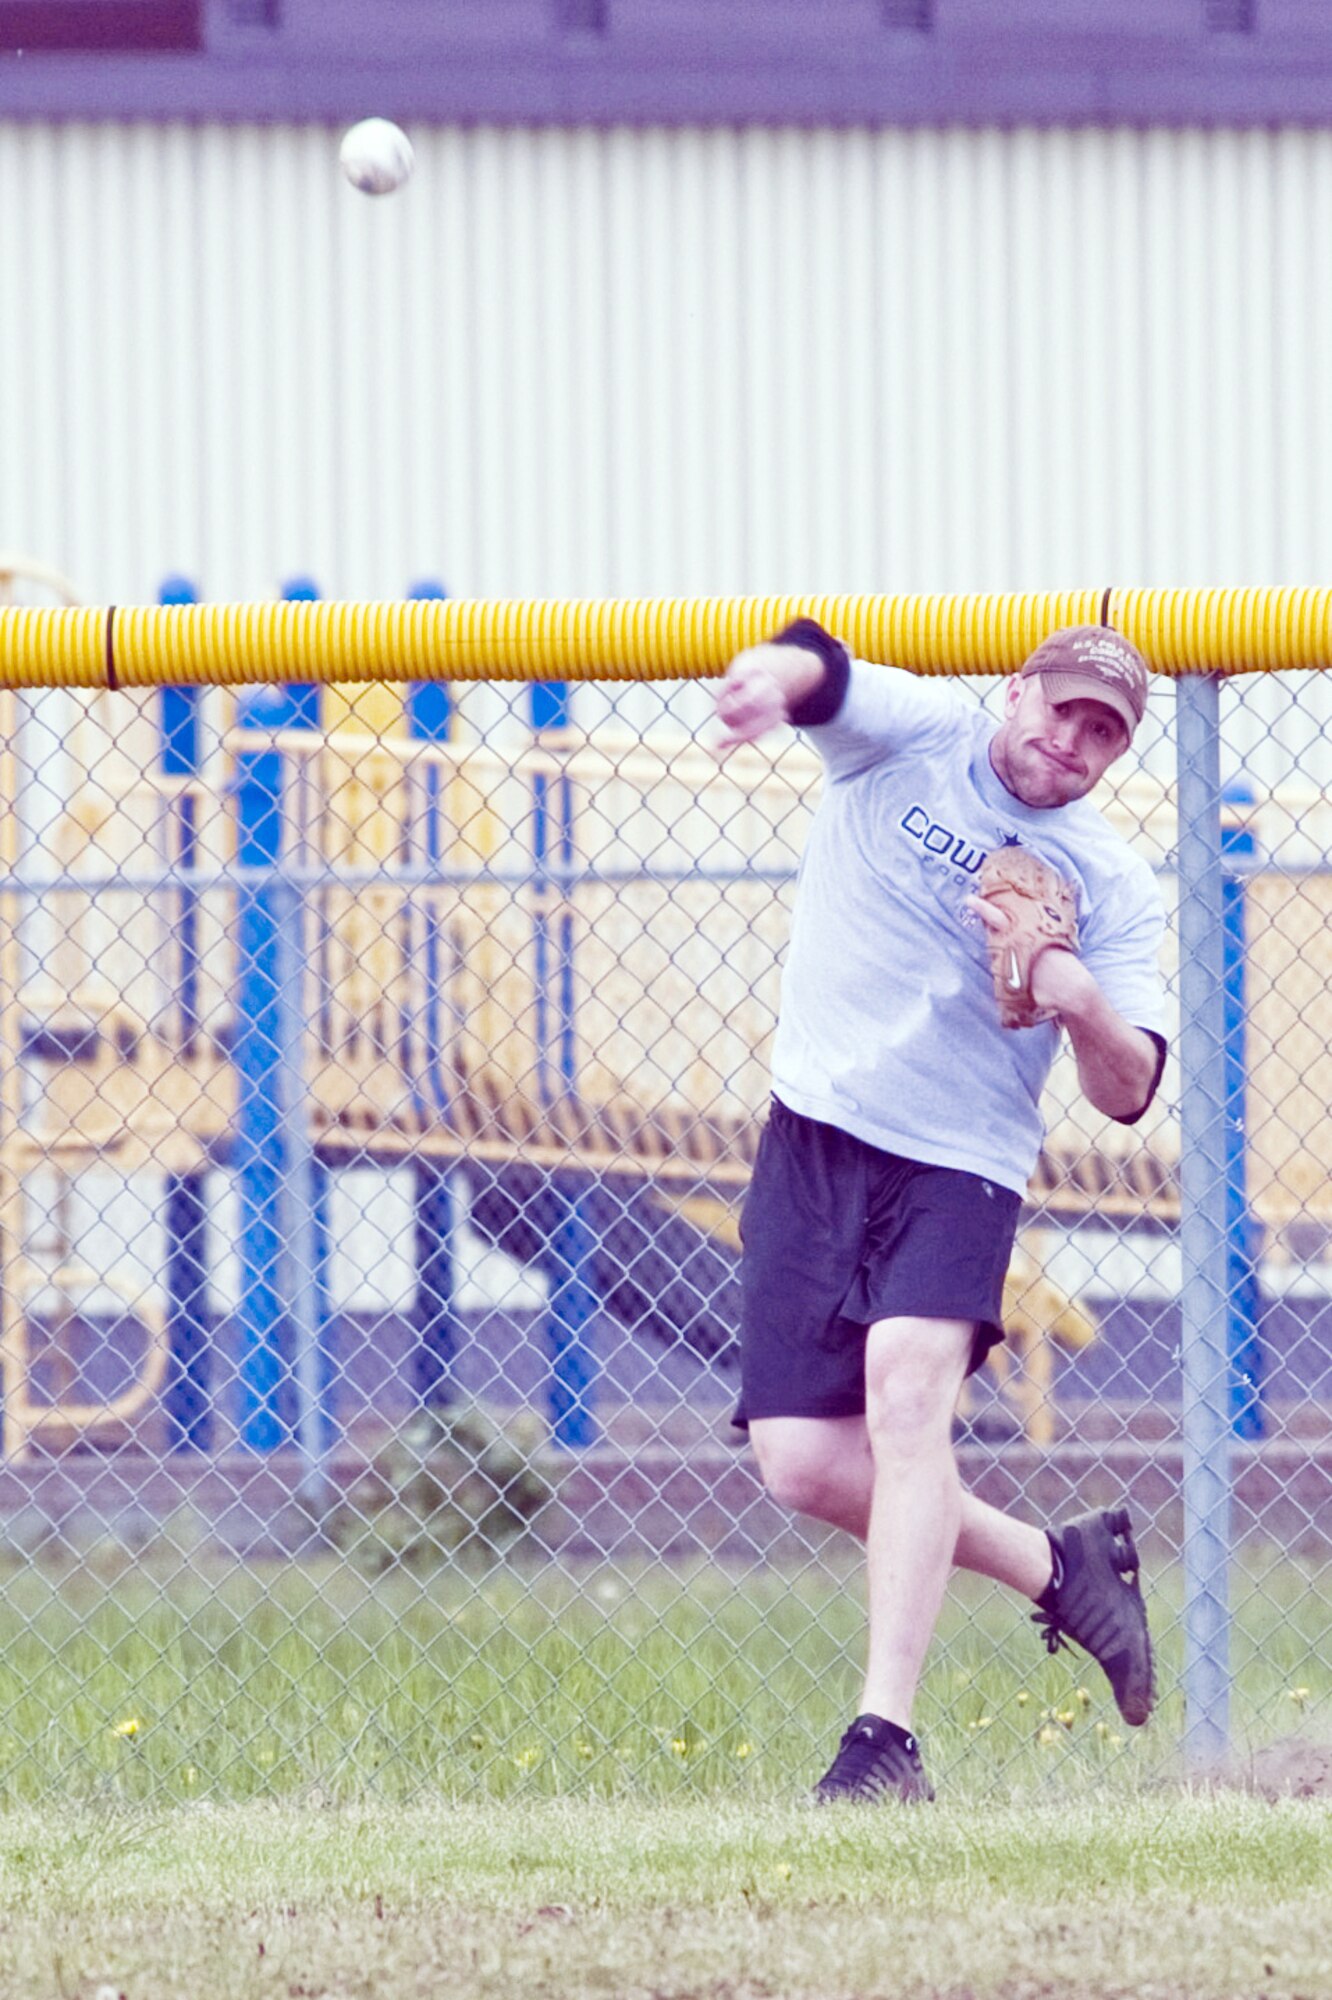 JOINT BASE ELMENDORF-RICHARDSON, Alaska ? Left fielder Mickey McAlister, of the 3rd Maintenance Squadron, throws the ball from the outfield during a game of intramural softball June 7. The 3rd MXS topped the 673d Force Support Squadron with a score of 14 to 3 starting themselves out with a 2-0 record and leaving the FSS 0-2. (Air Force photo/Senior Airman Christopher Gross)